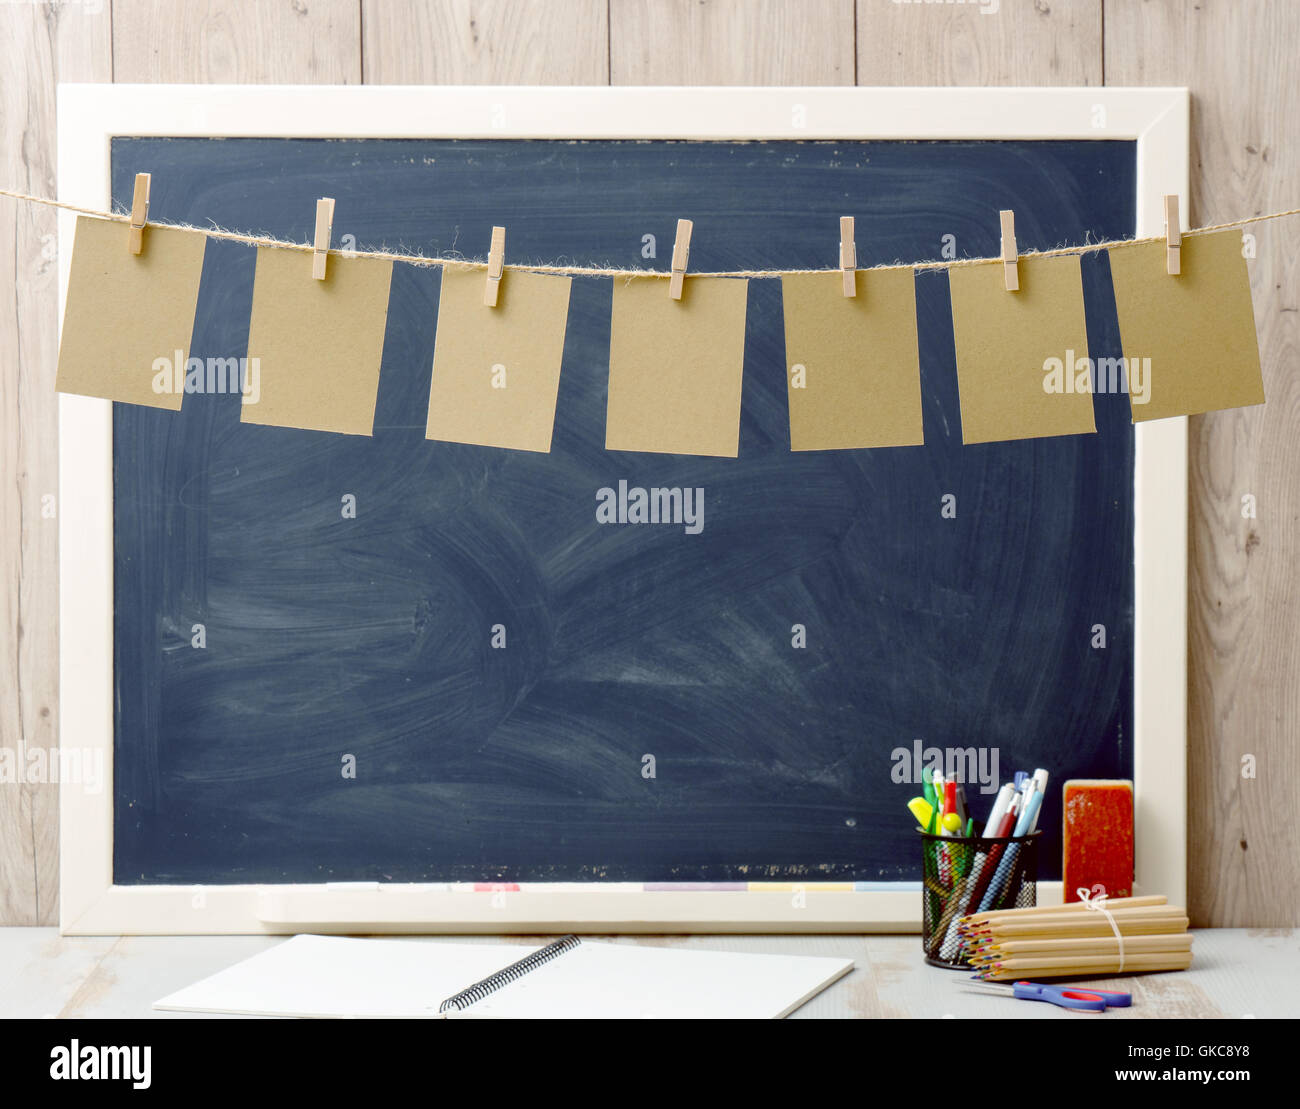 seven sheets of paper hanging and blackboard in background Stock Photo